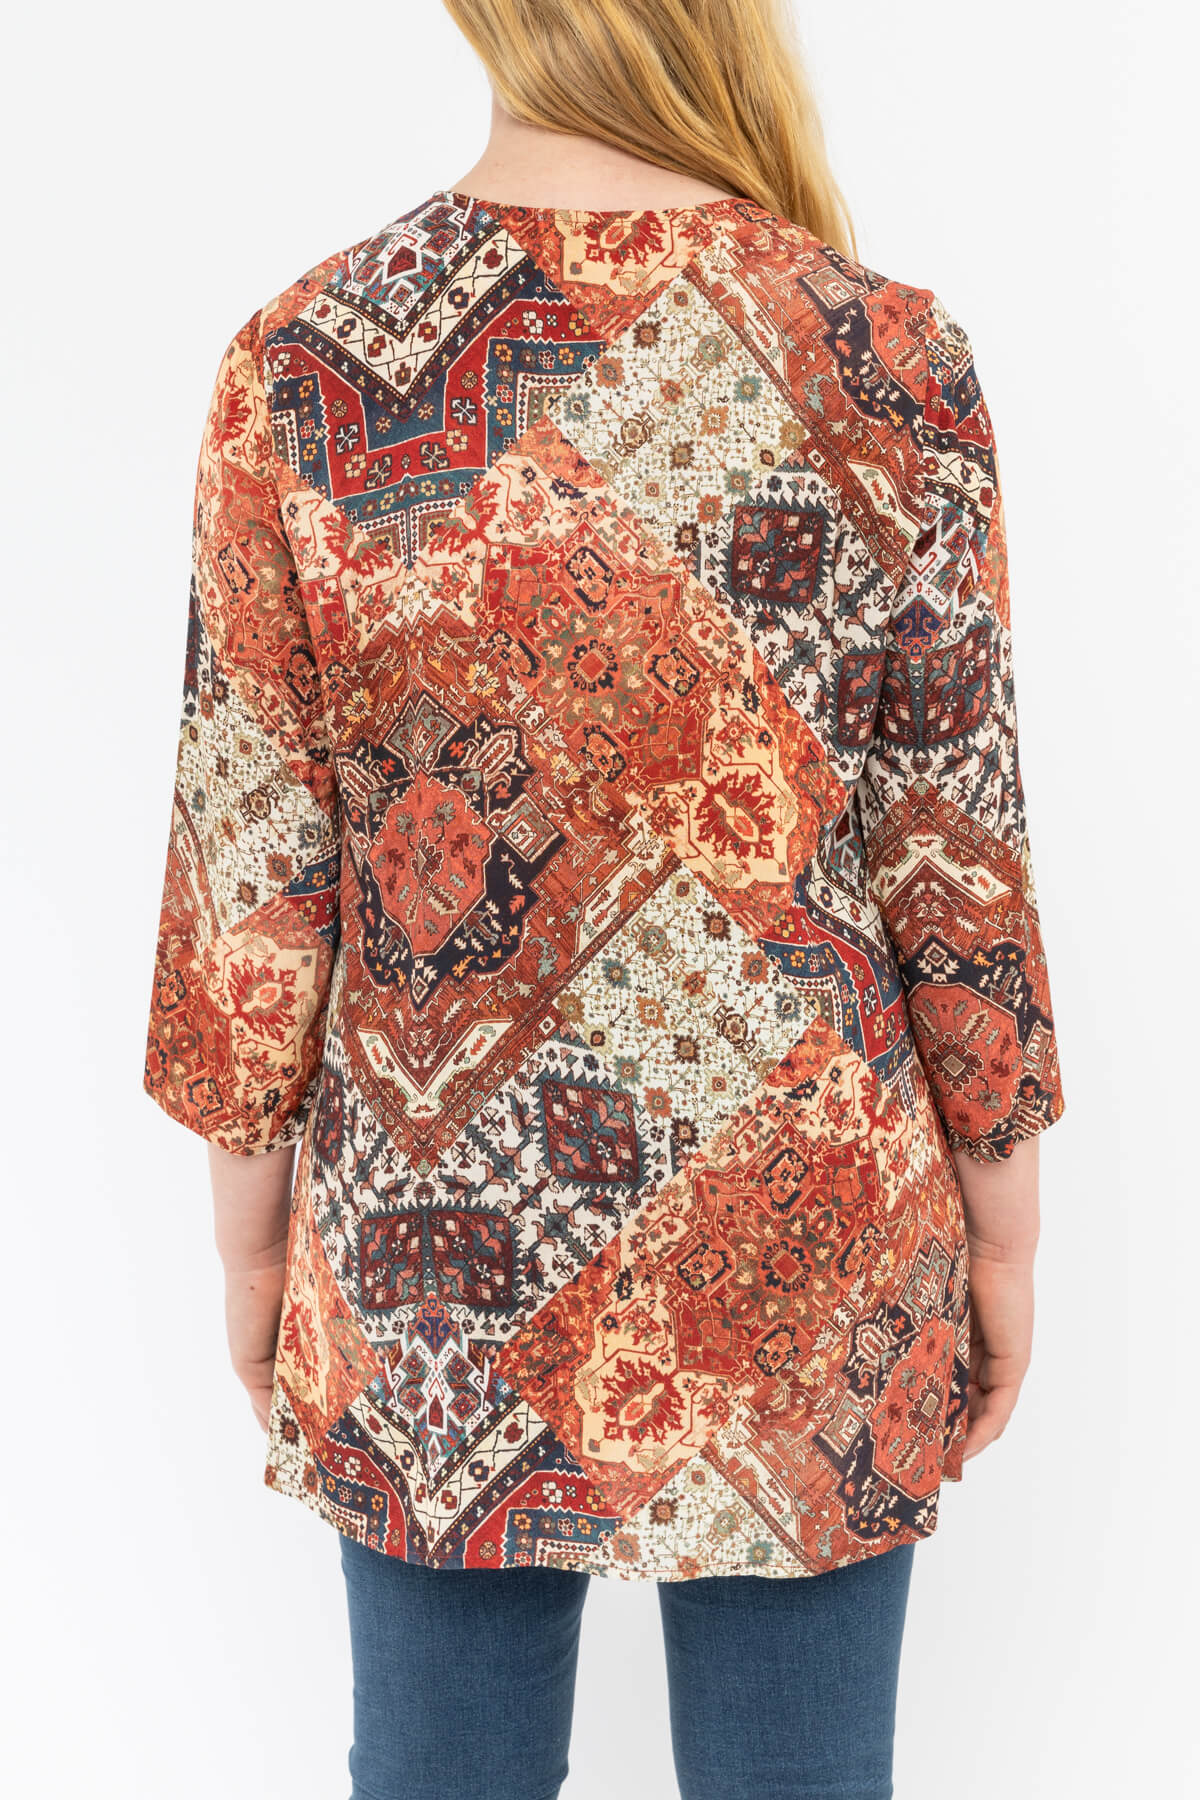 Spice Patchwork Top